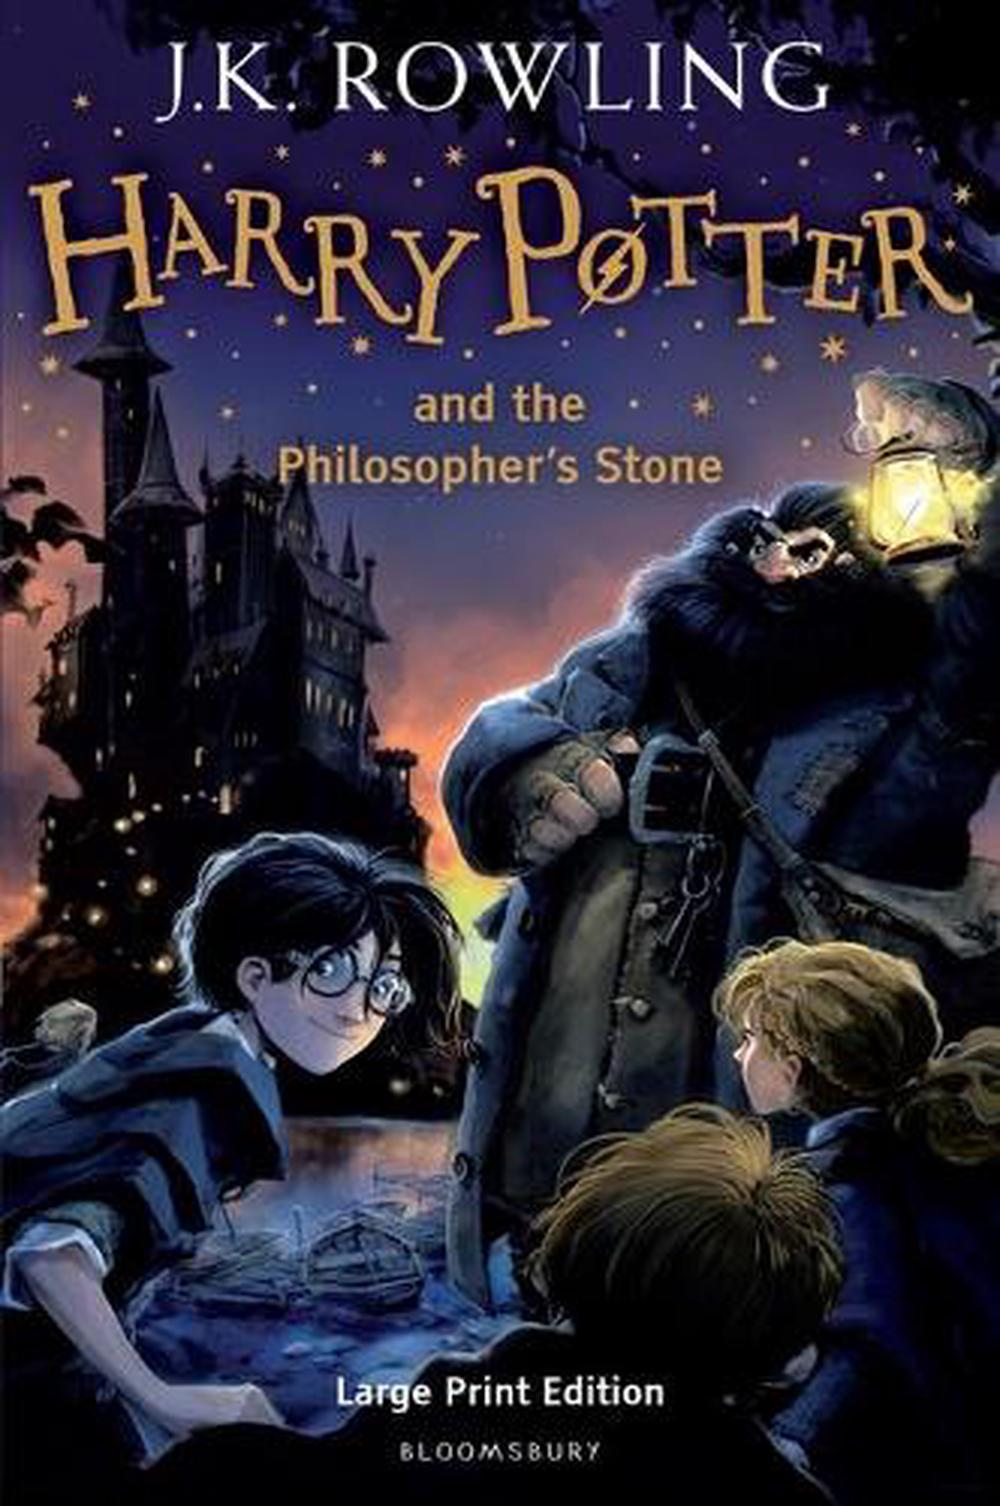 harry potter and the philosopher's stone full book review